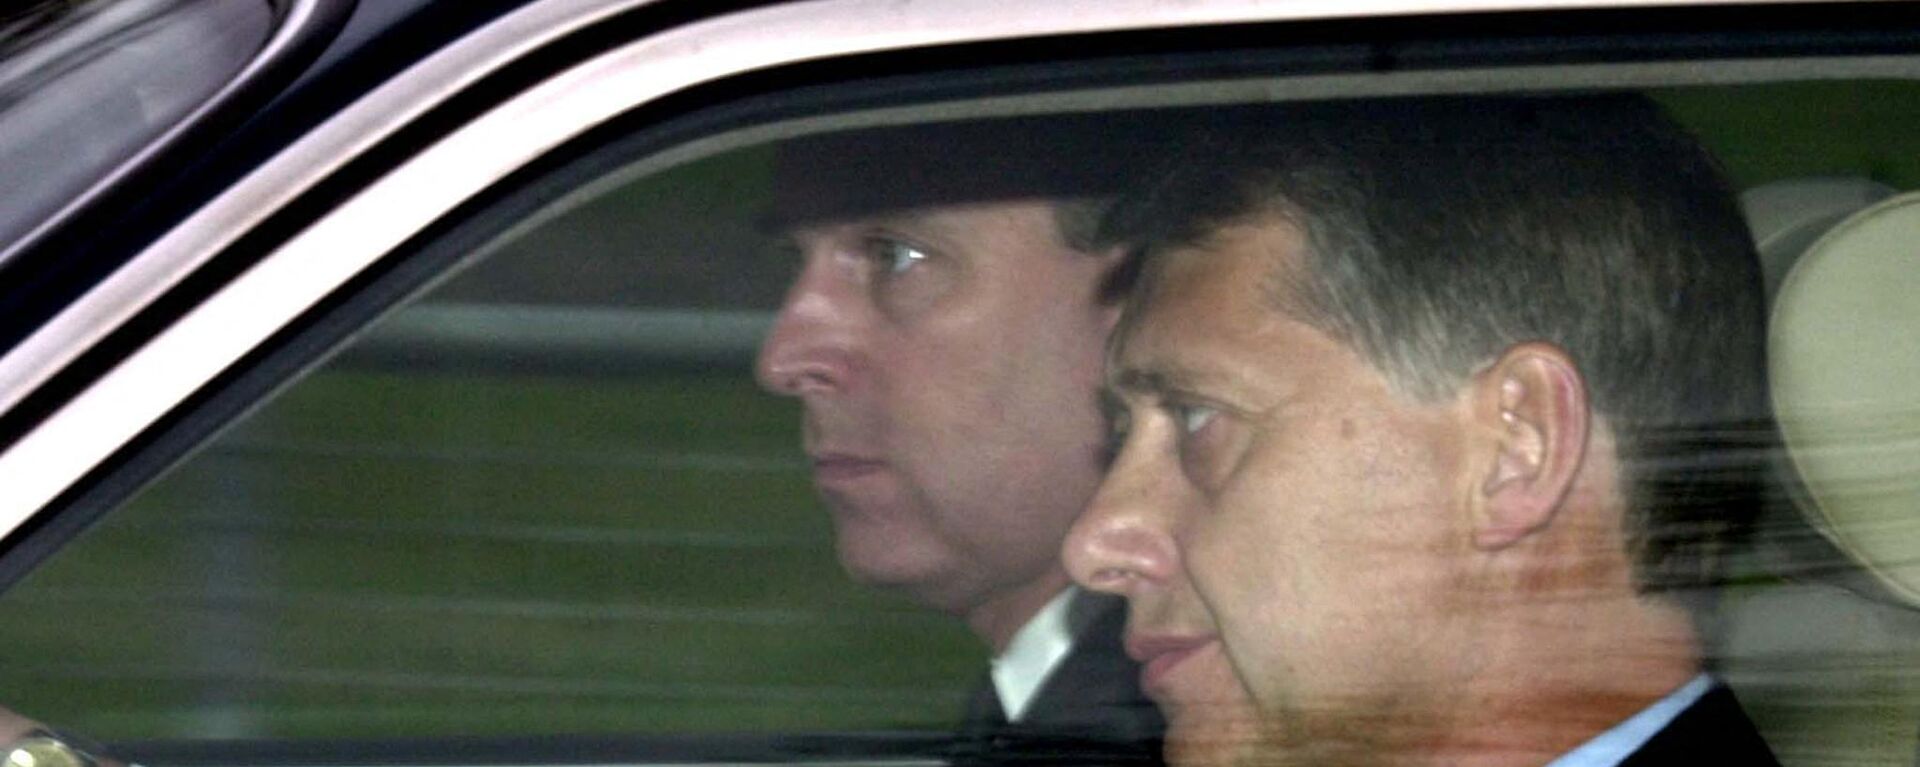 Prince Andrew at the wheel of his car next to a detective arrives at the Chapel Royal, Windsor Park, 31 March 2002 - Sputnik International, 1920, 10.06.2022